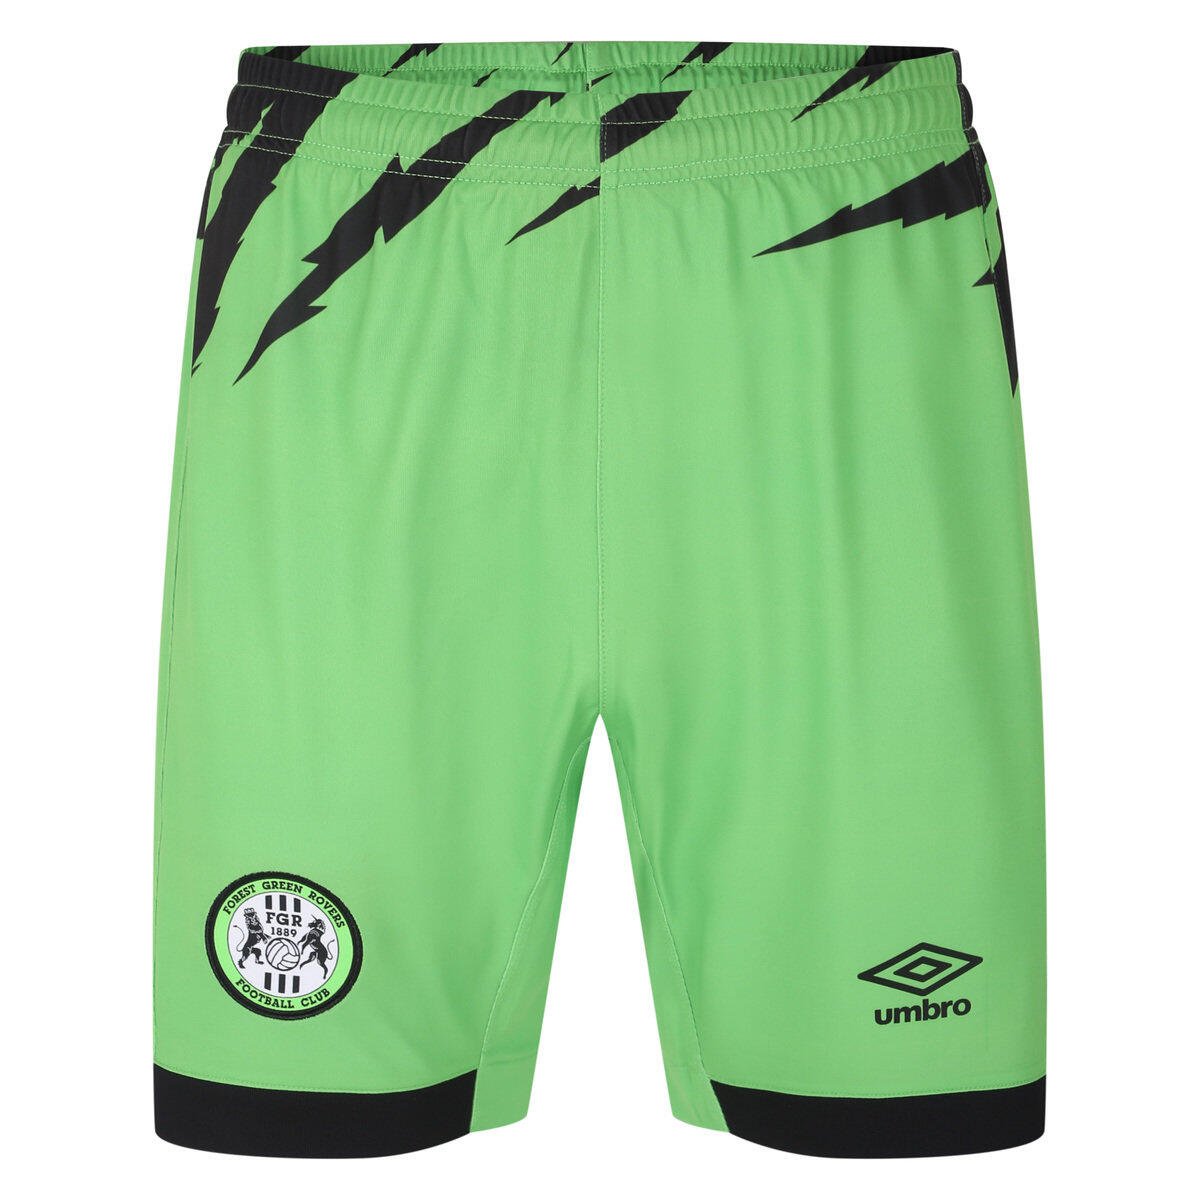 UMBRO Childrens/Kids 23/24 Forest Green Rovers FC Home Shorts (Green/Black)